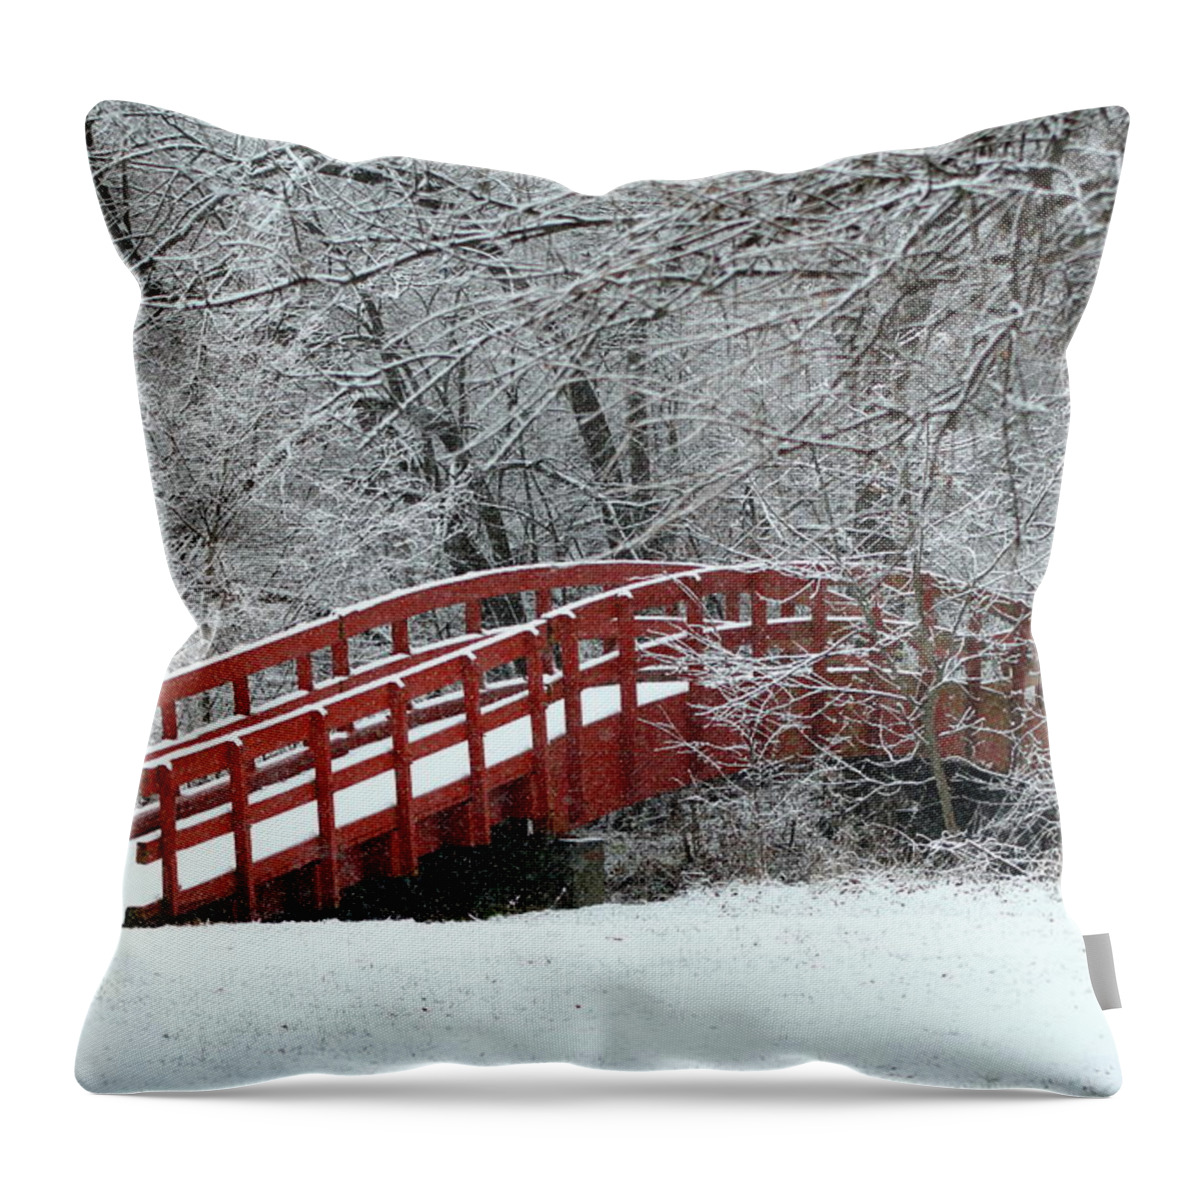 Red Throw Pillow featuring the photograph Winter Solitude by Lens Art Photography By Larry Trager